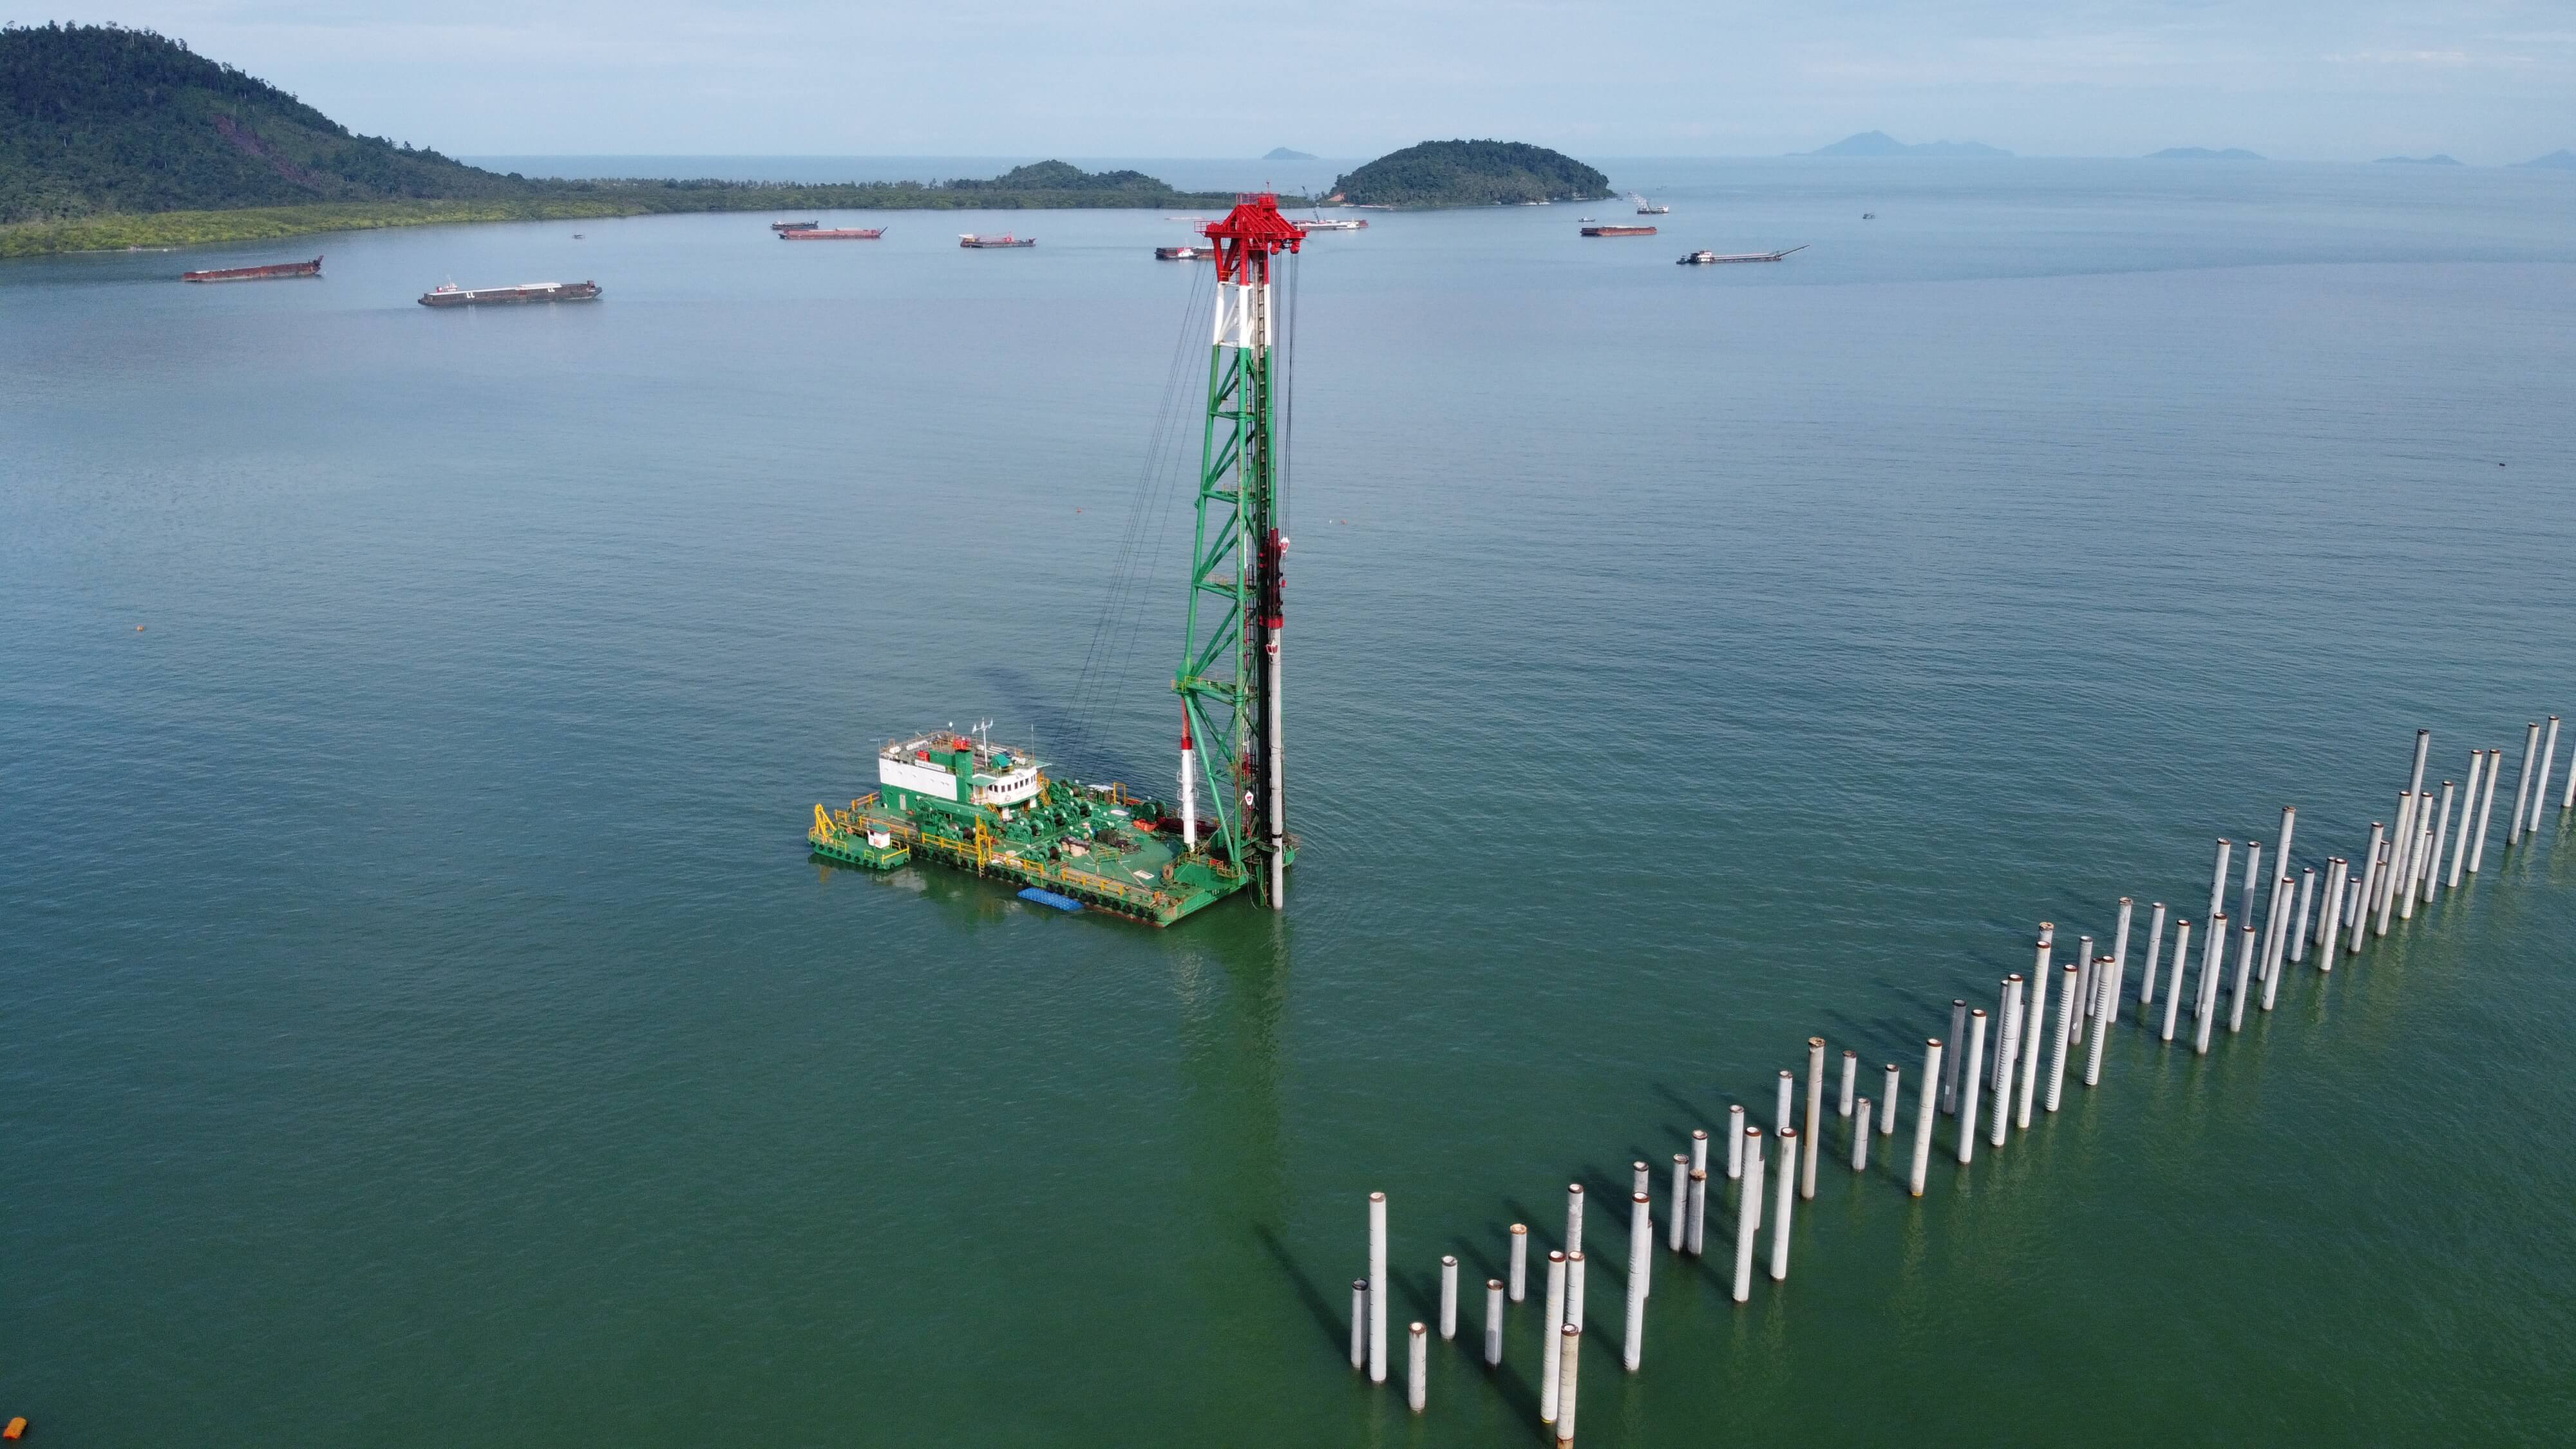 SWI Sulawesi X Standing 70-m Tall, Ready to Drive a Pile (Feb 12th, 2020)